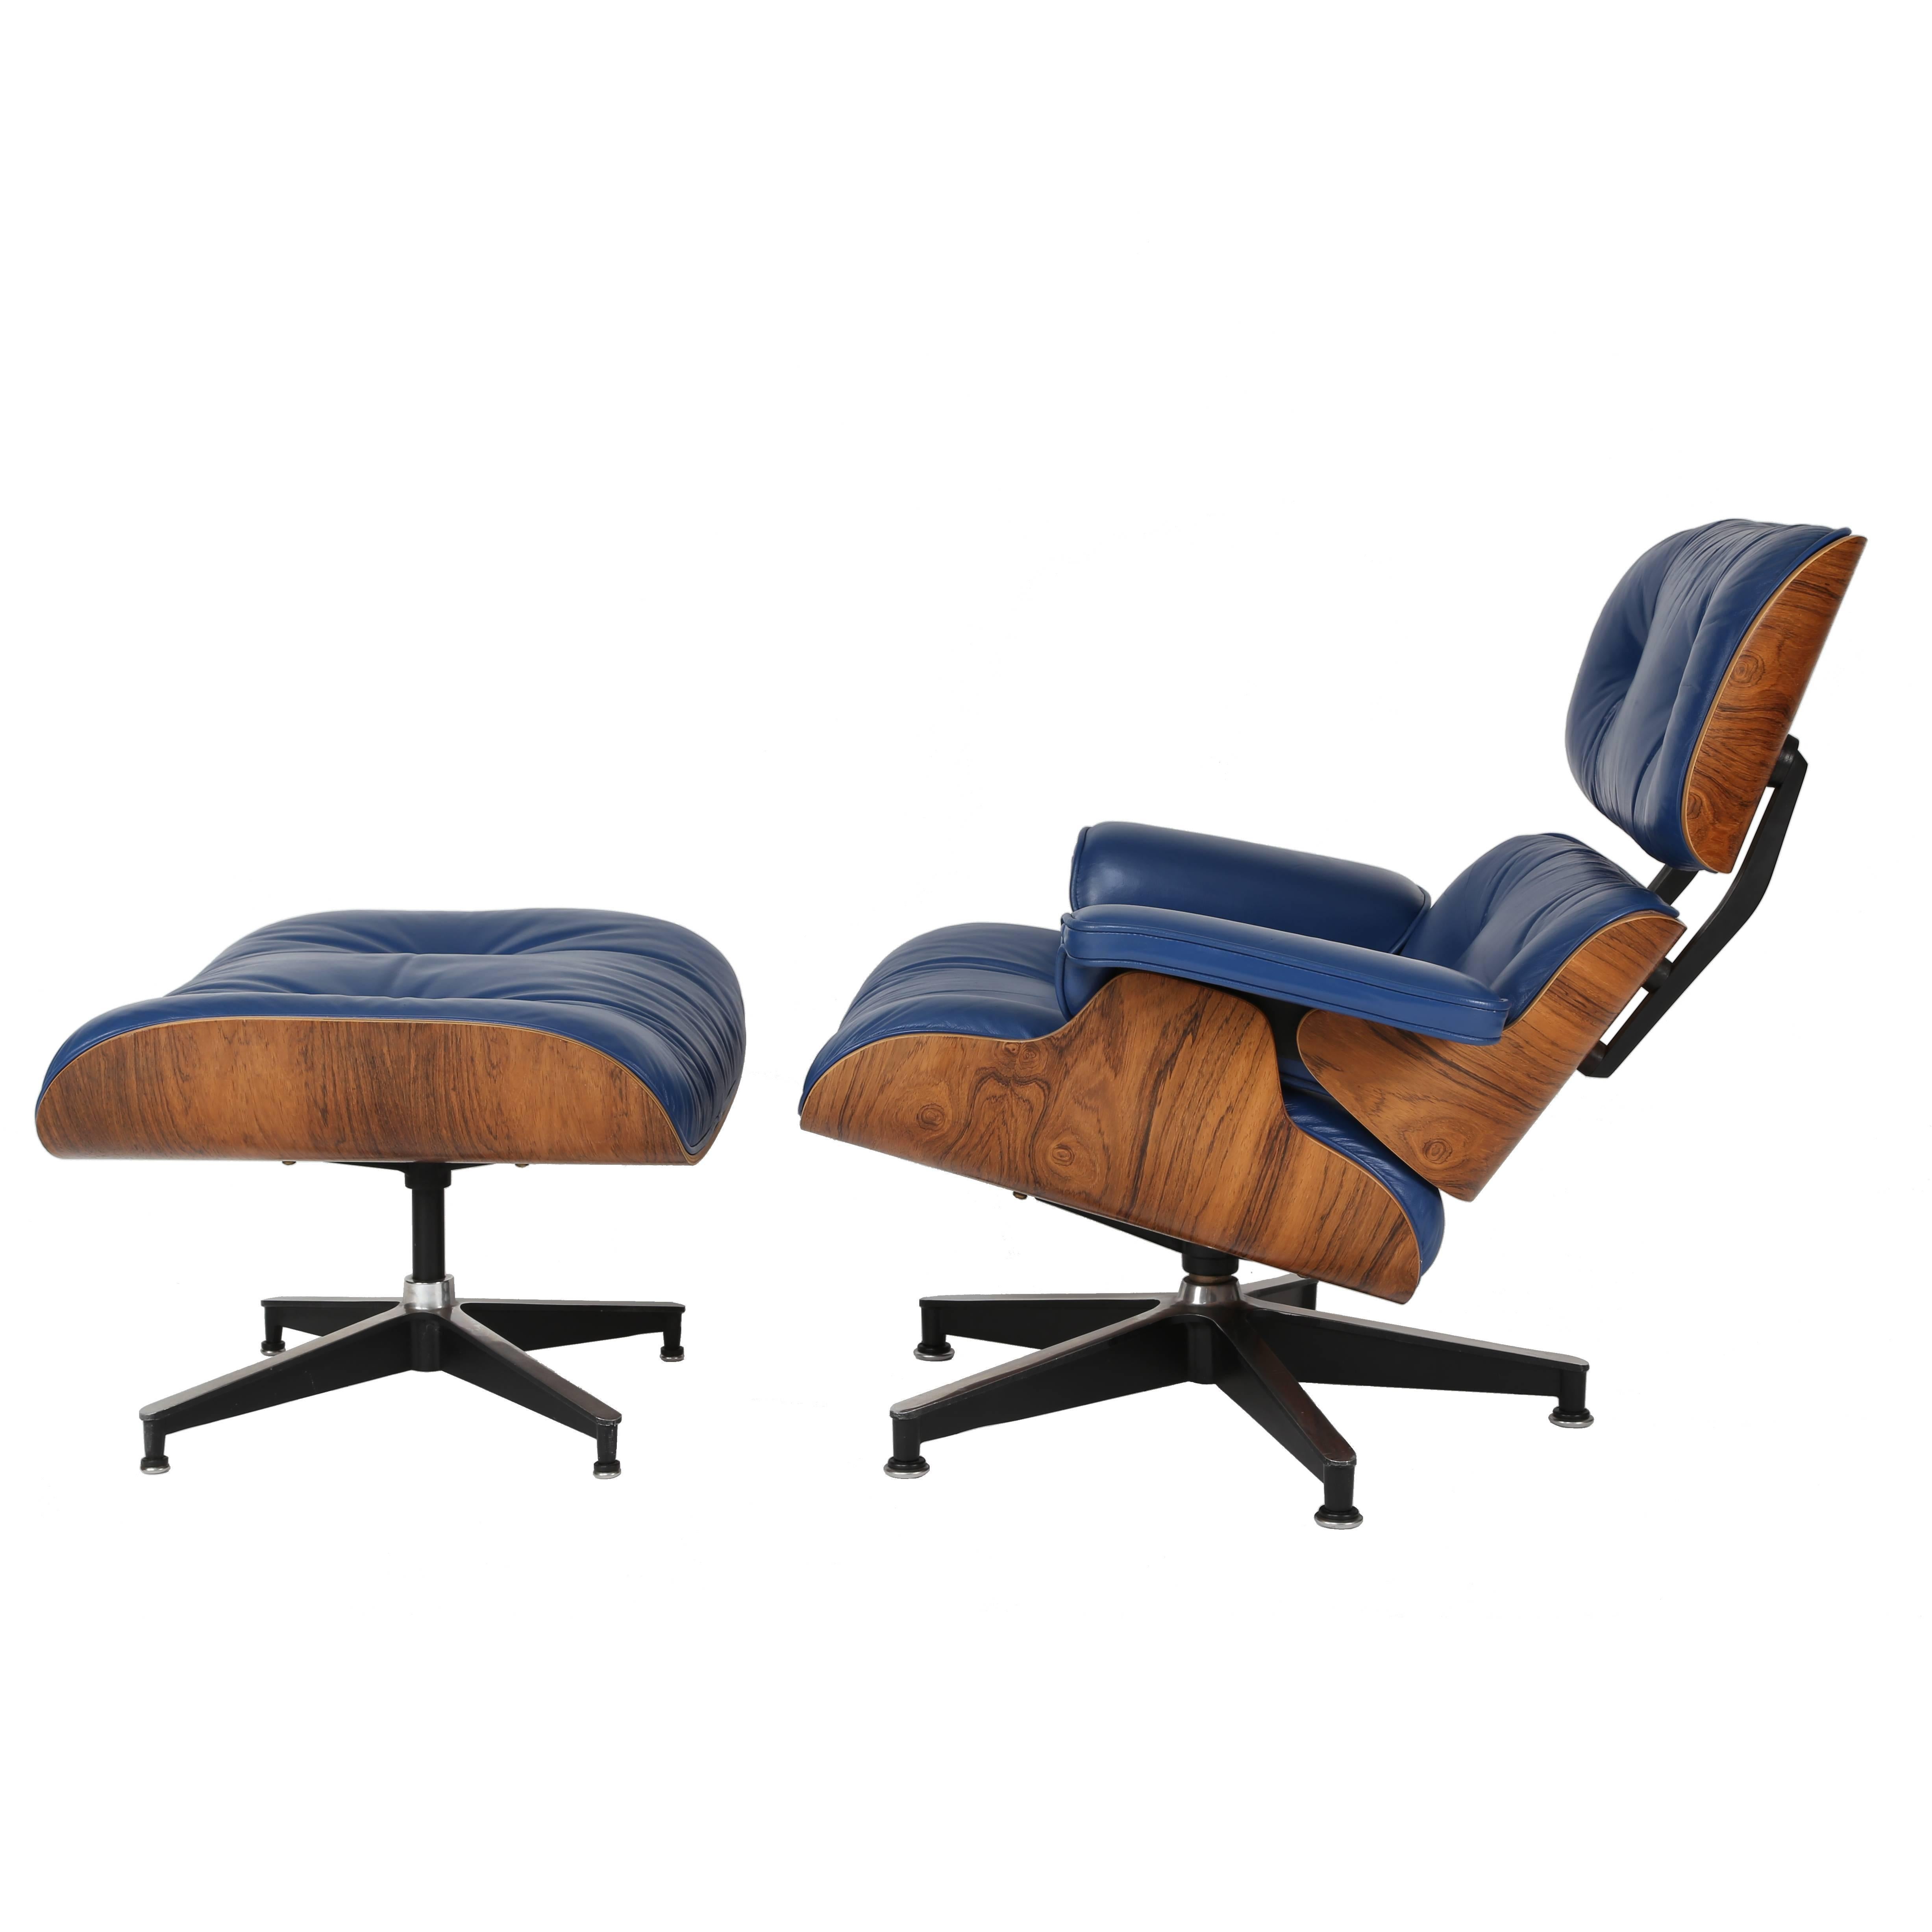 Vintage 670-671 Eames Rosewood Lounge Chair and Ottoman in Blue Leather